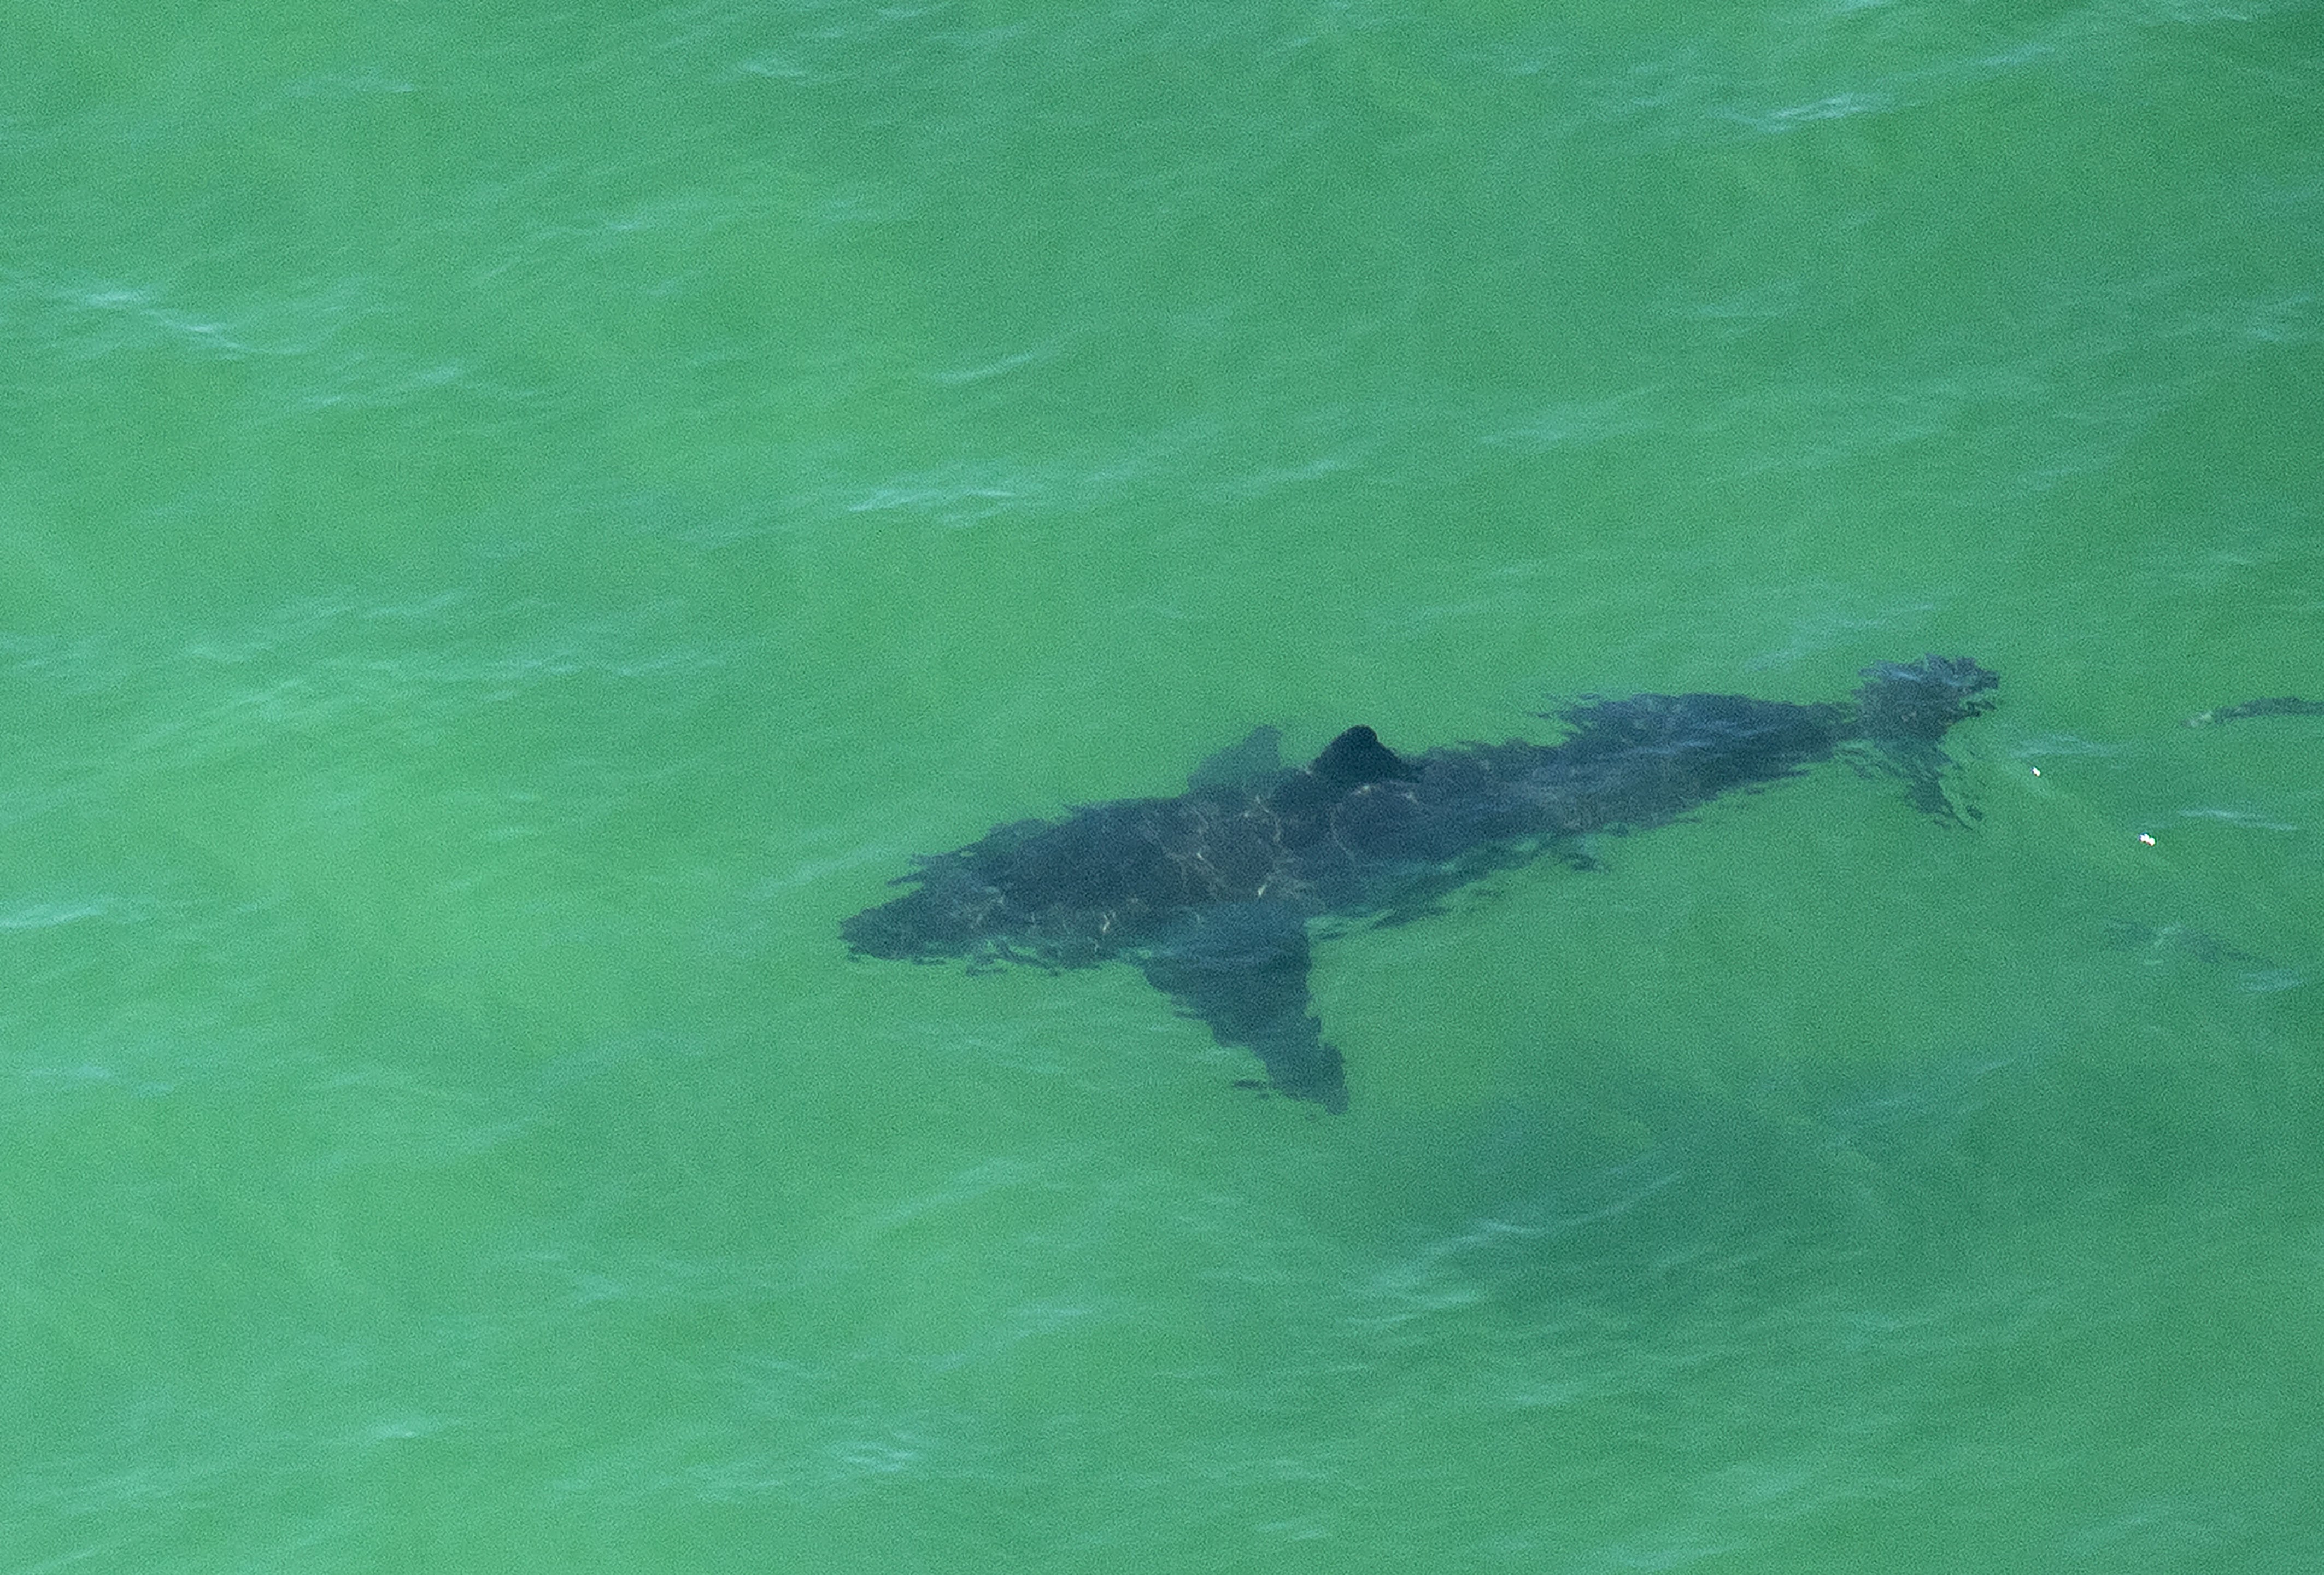 Reasearchers find the great white shark population has increased off the coast of California